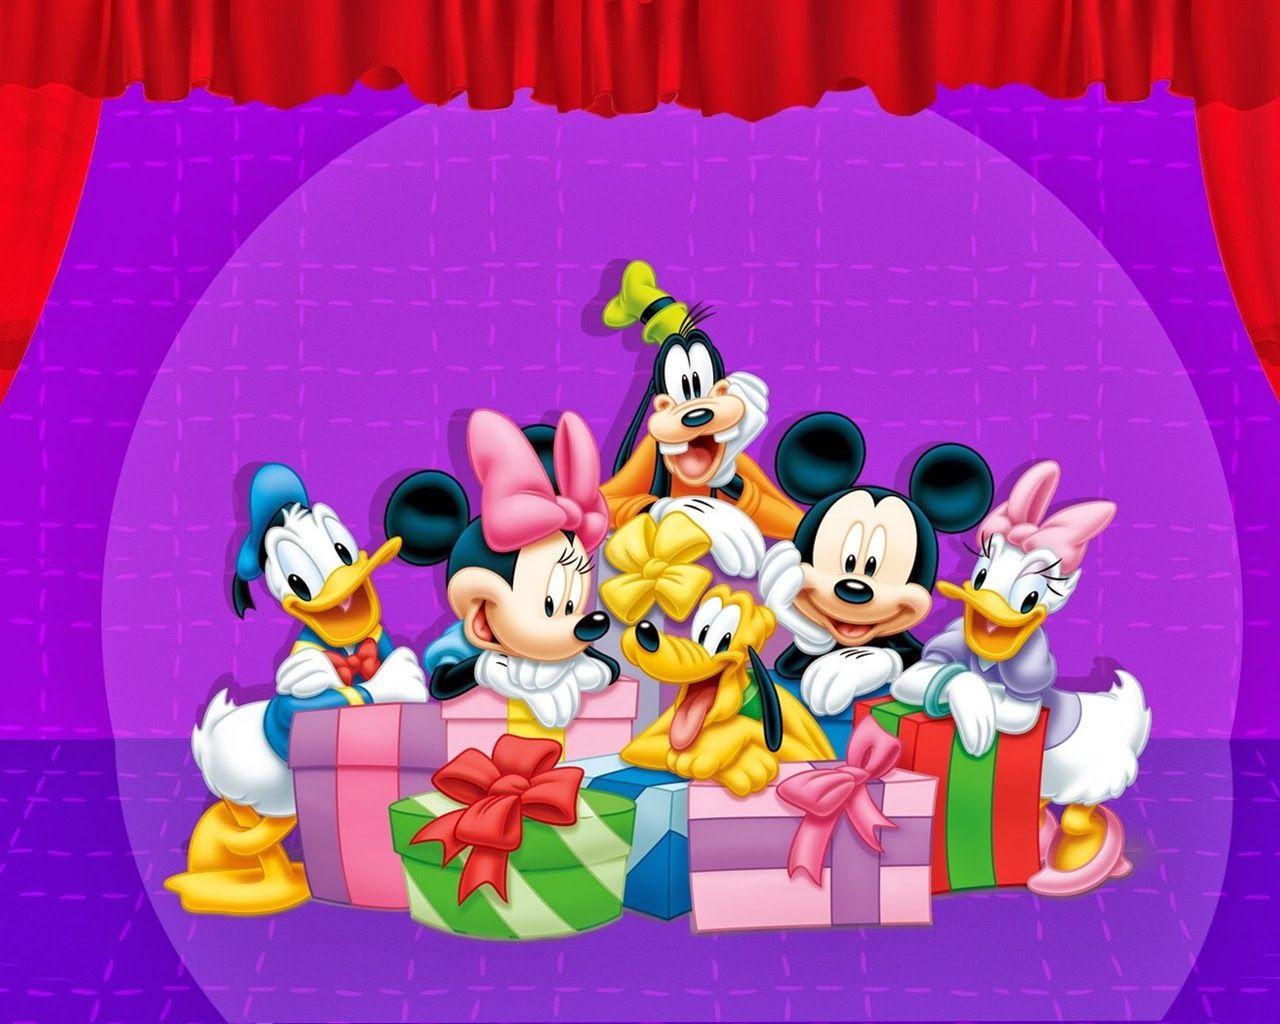 mickey mouse birthday party wallpaper